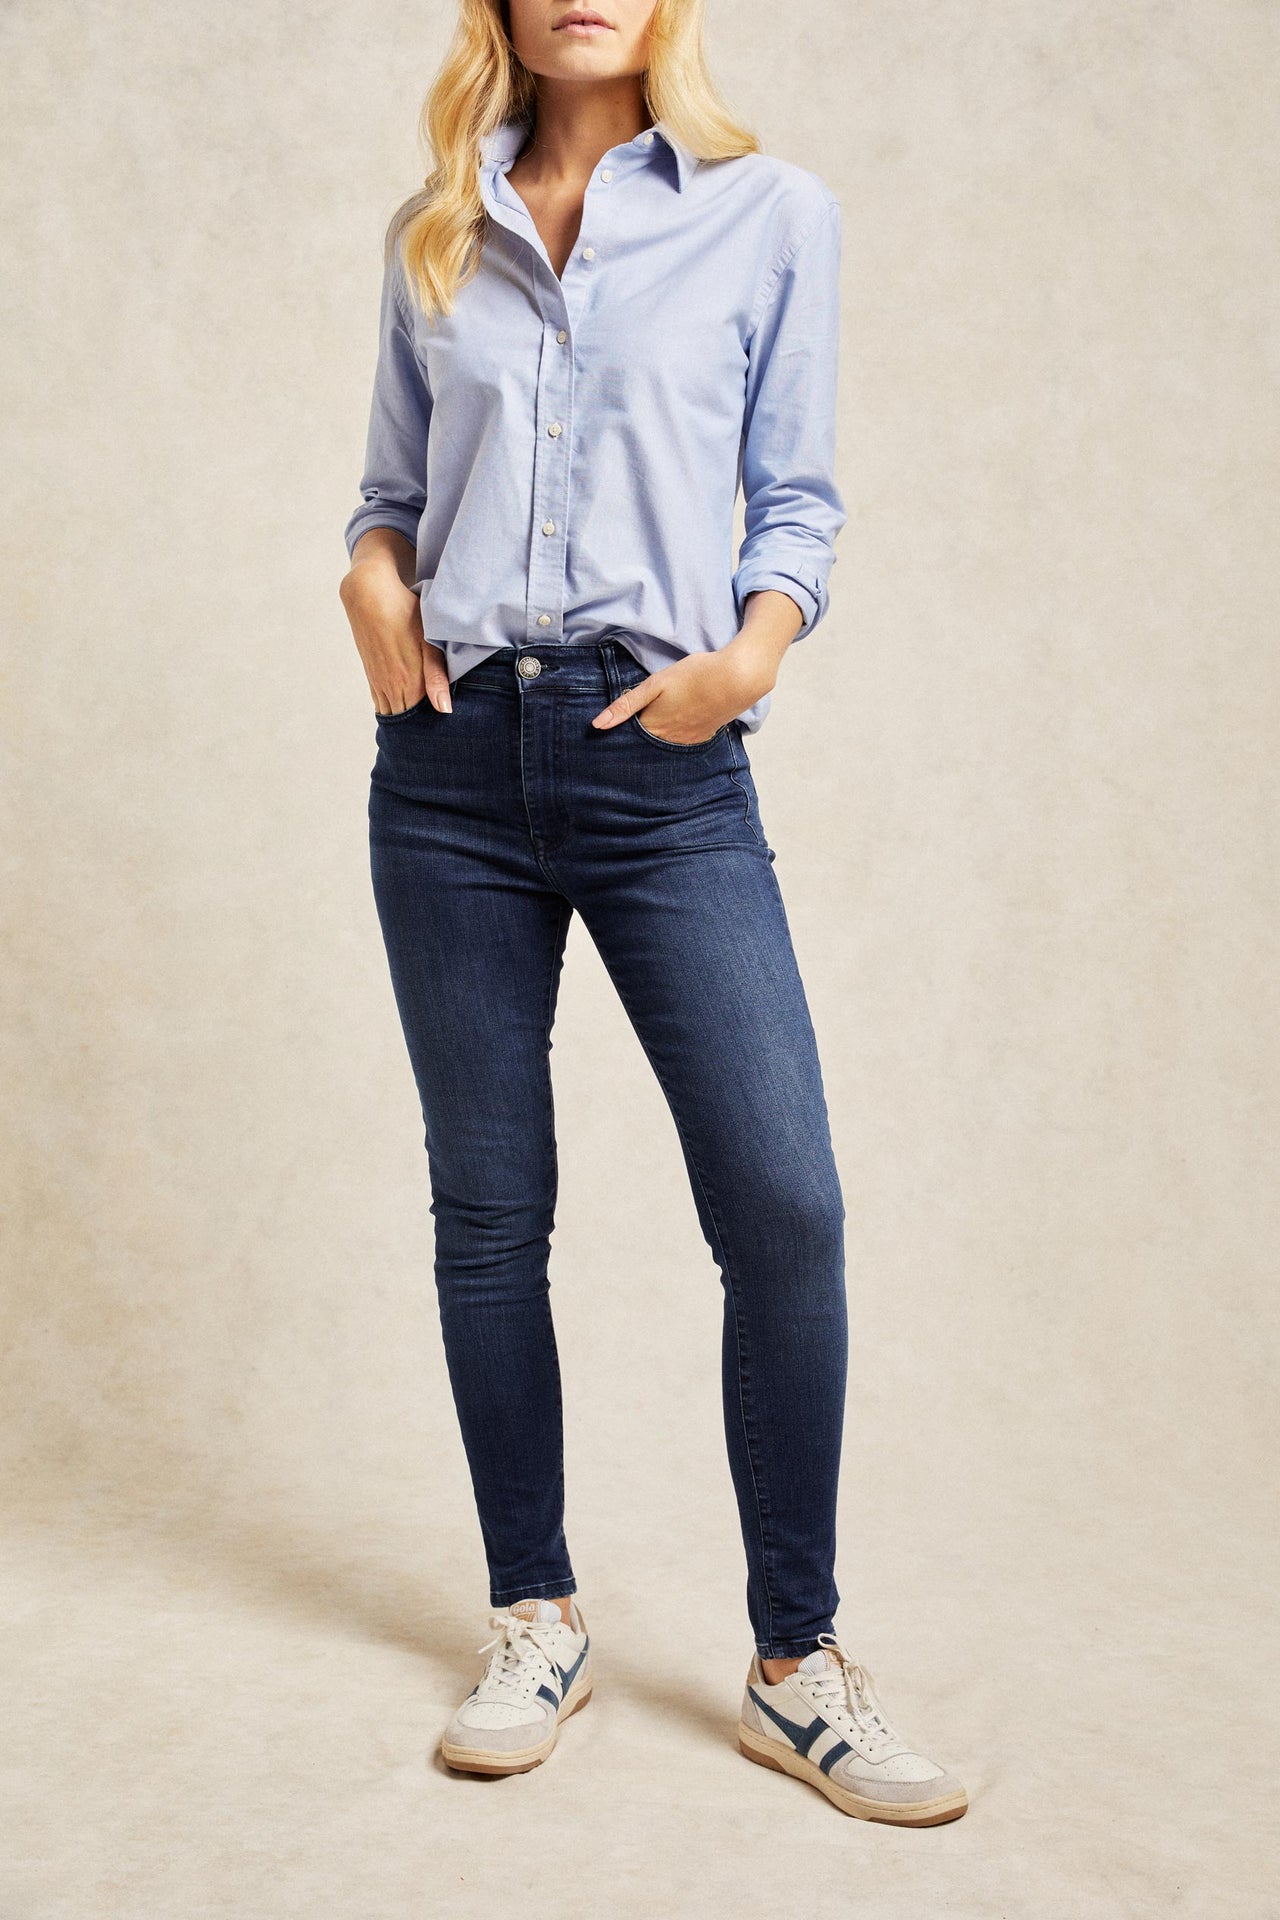 Elham skinny blue jeans in a flattering mid-rise cut. Stretch for comfort. Mid wash denim skinny jean. Smart casual wear. Size 6,8,10,12,14,16,18. Made in Portugal. Machine wash.